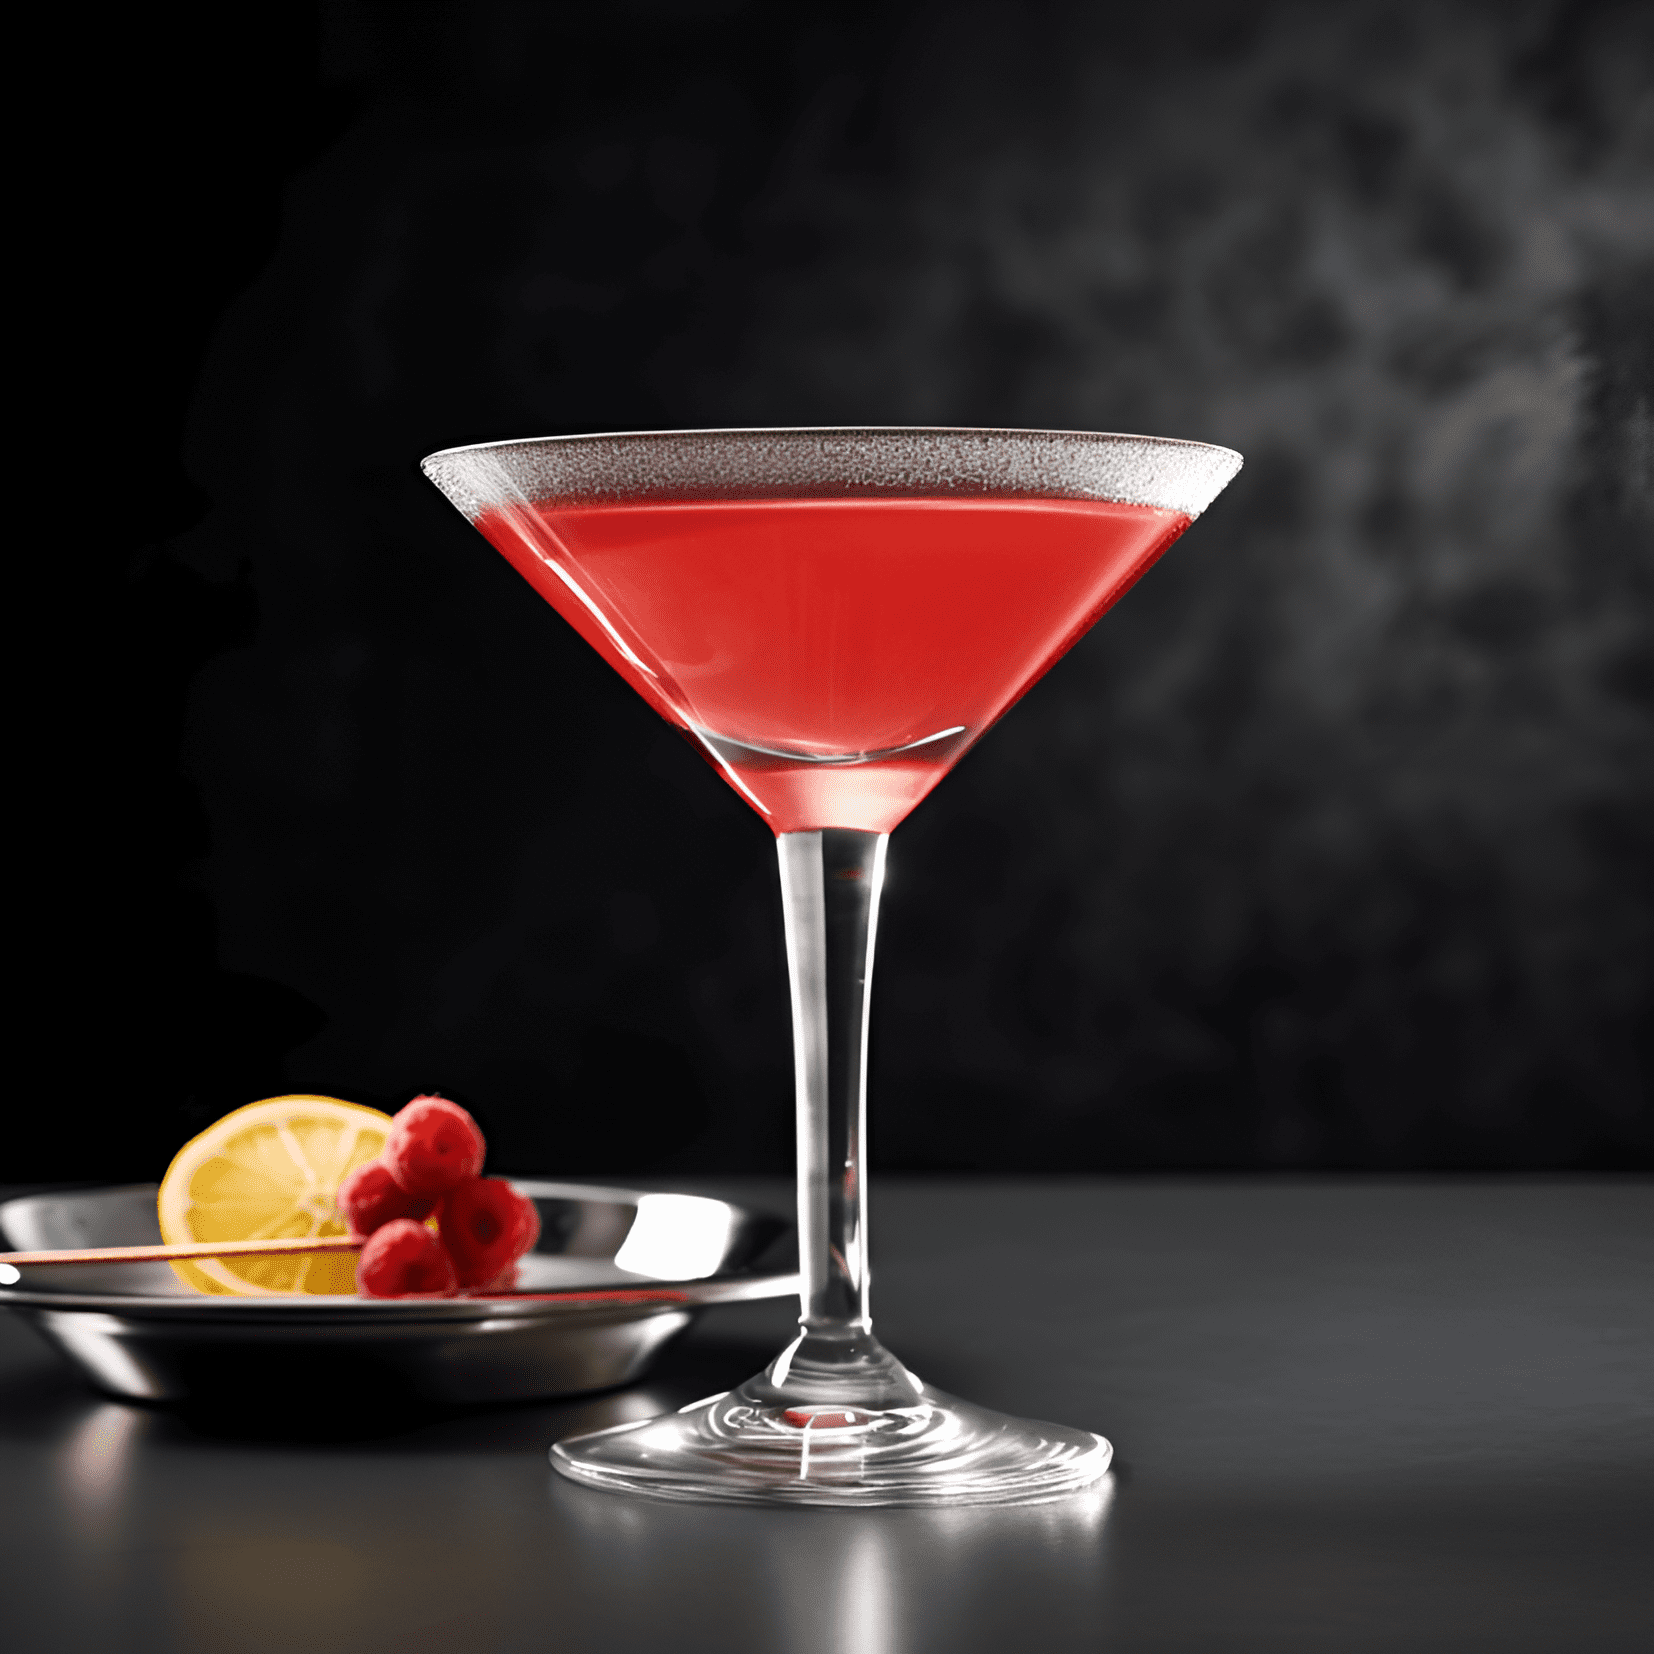 The French Martini has a rich, velvety texture with a sweet and fruity taste. The combination of pineapple juice, Chambord, and vodka creates a well-balanced flavor profile that is both refreshing and indulgent.